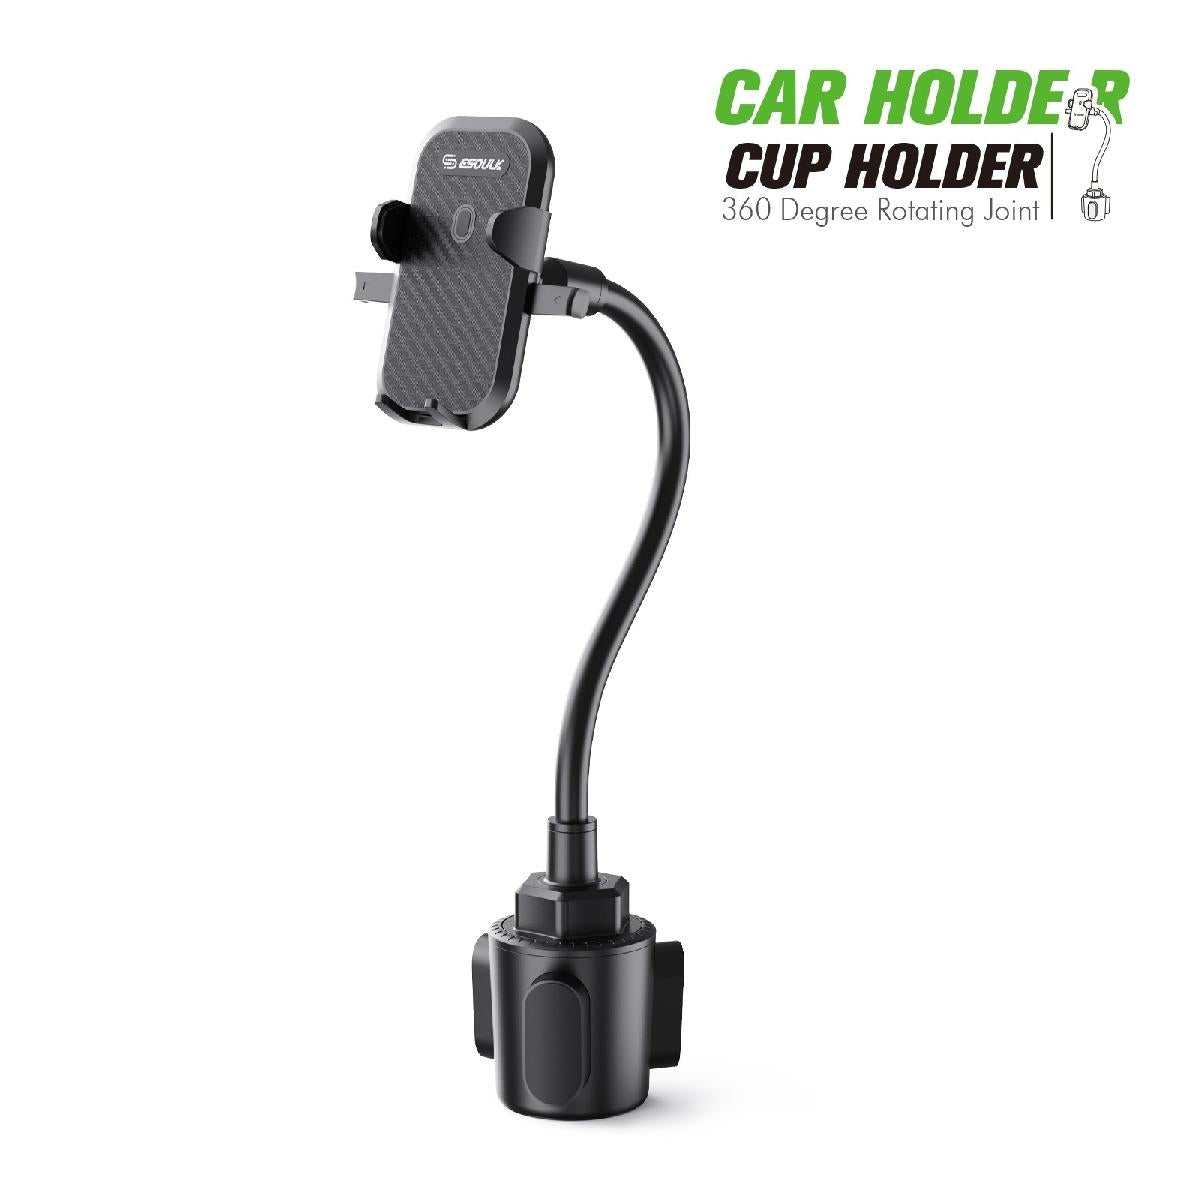 CAR CUP HOLDER PHONE MOUNT - 11INCH LONG